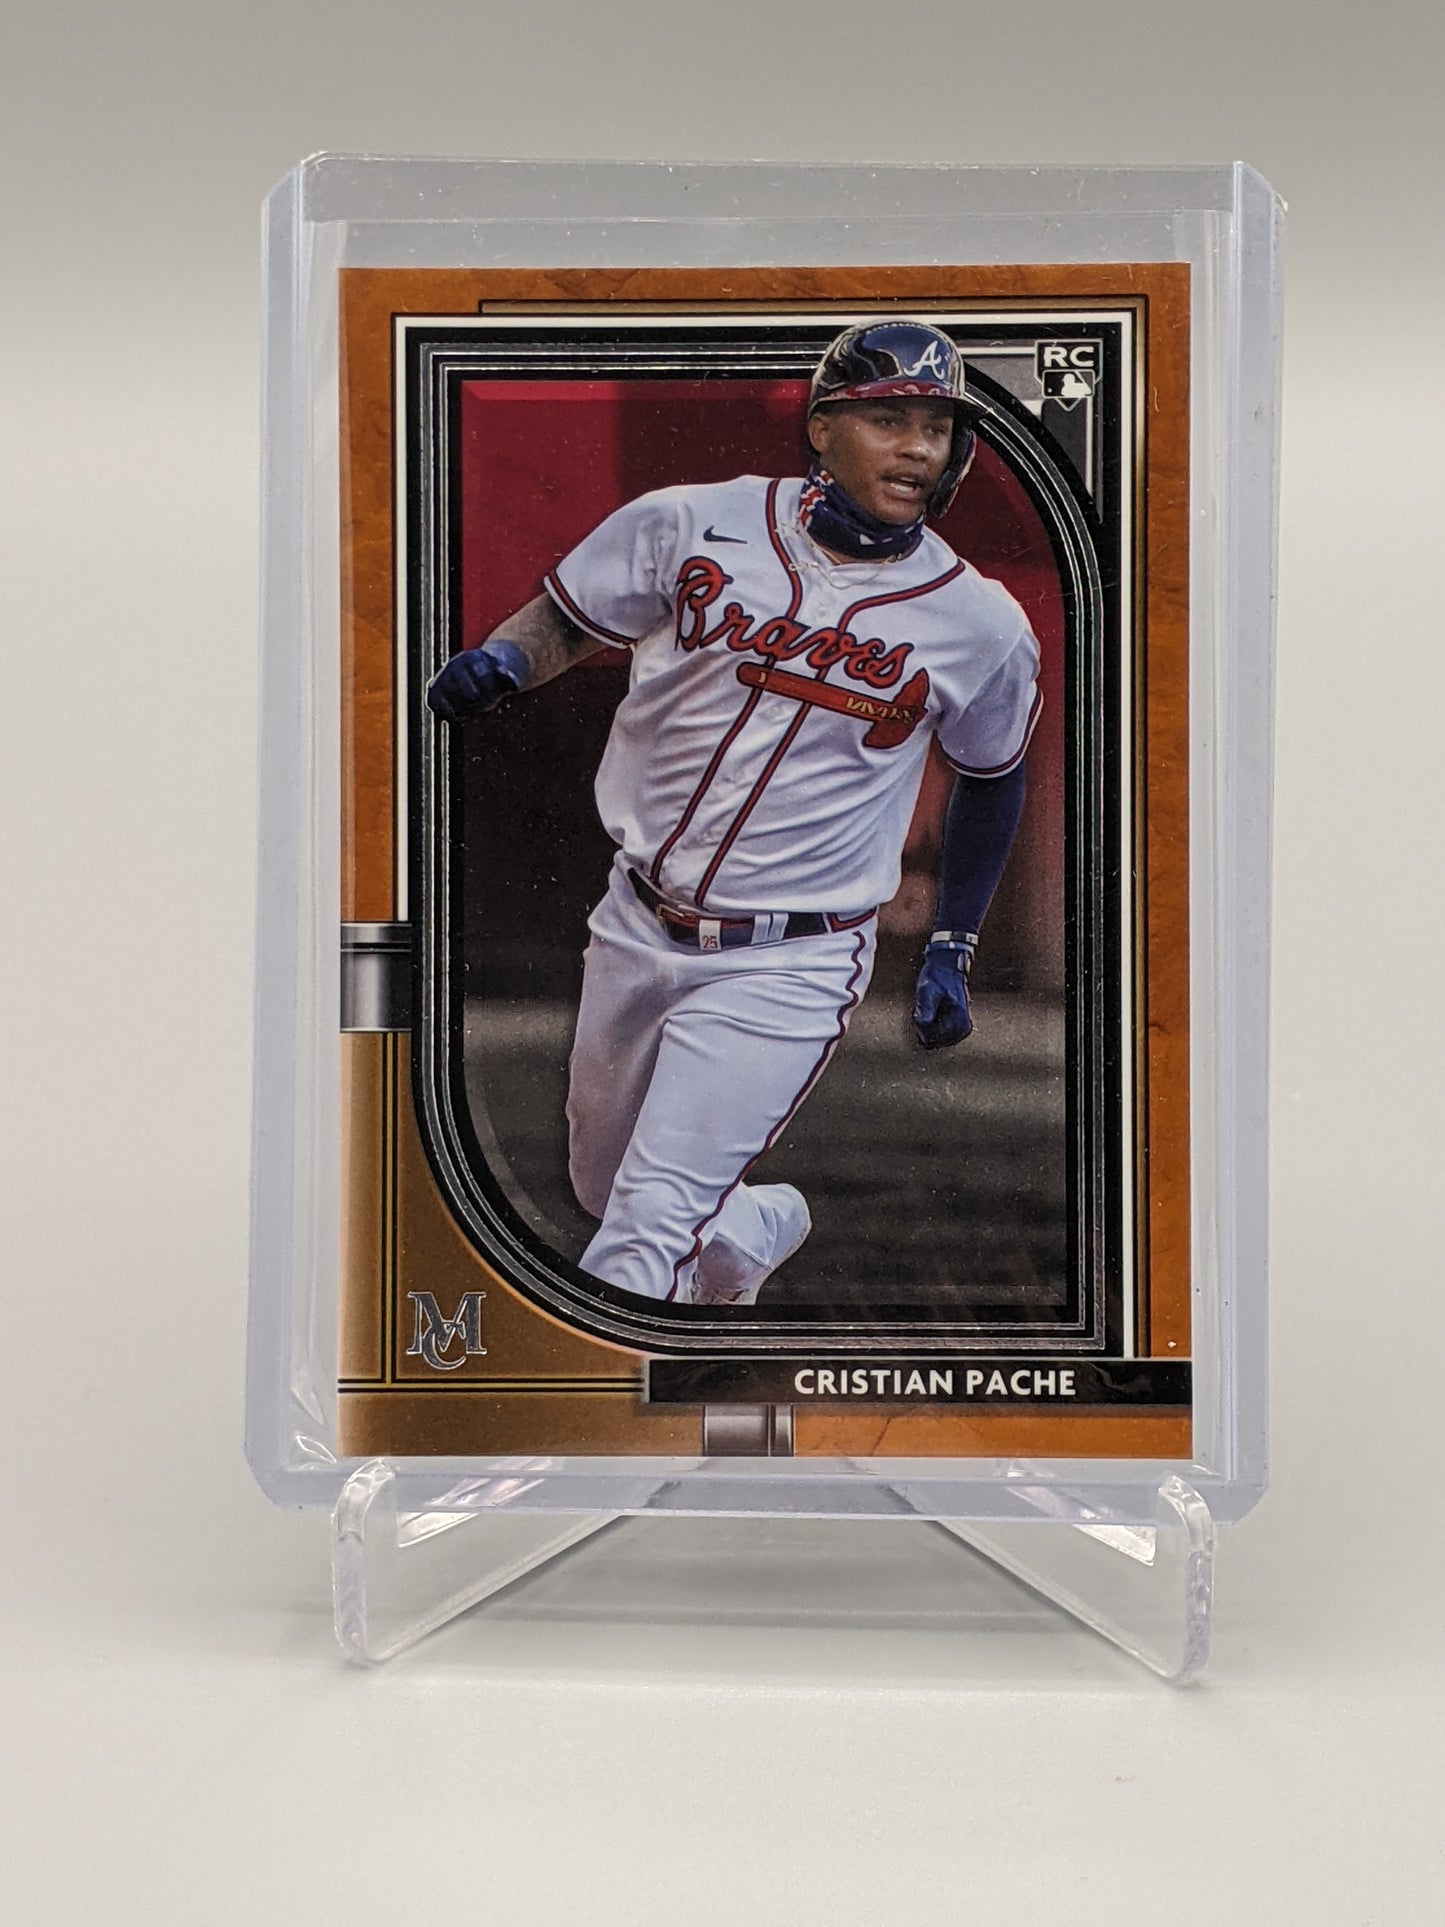 2021 Topps Museum Copper #14 Cristian Pache RC Braves